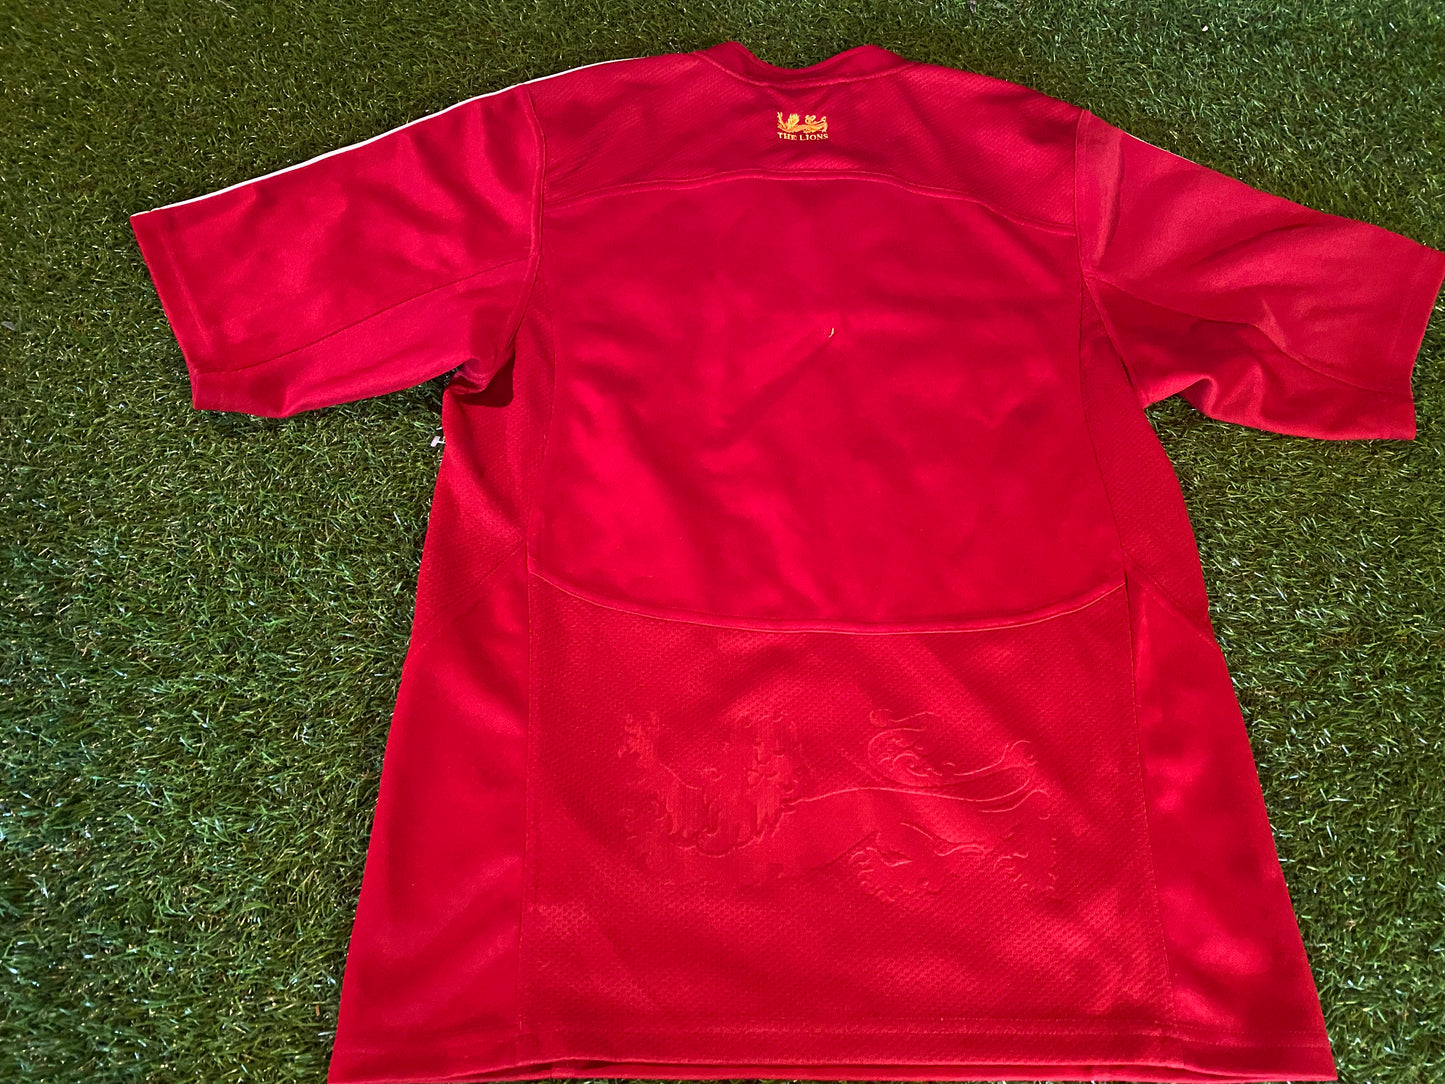 British & Irish Lions Rugby Union Football Small Mans 2009 Adidas Tour of South Africa Jersey